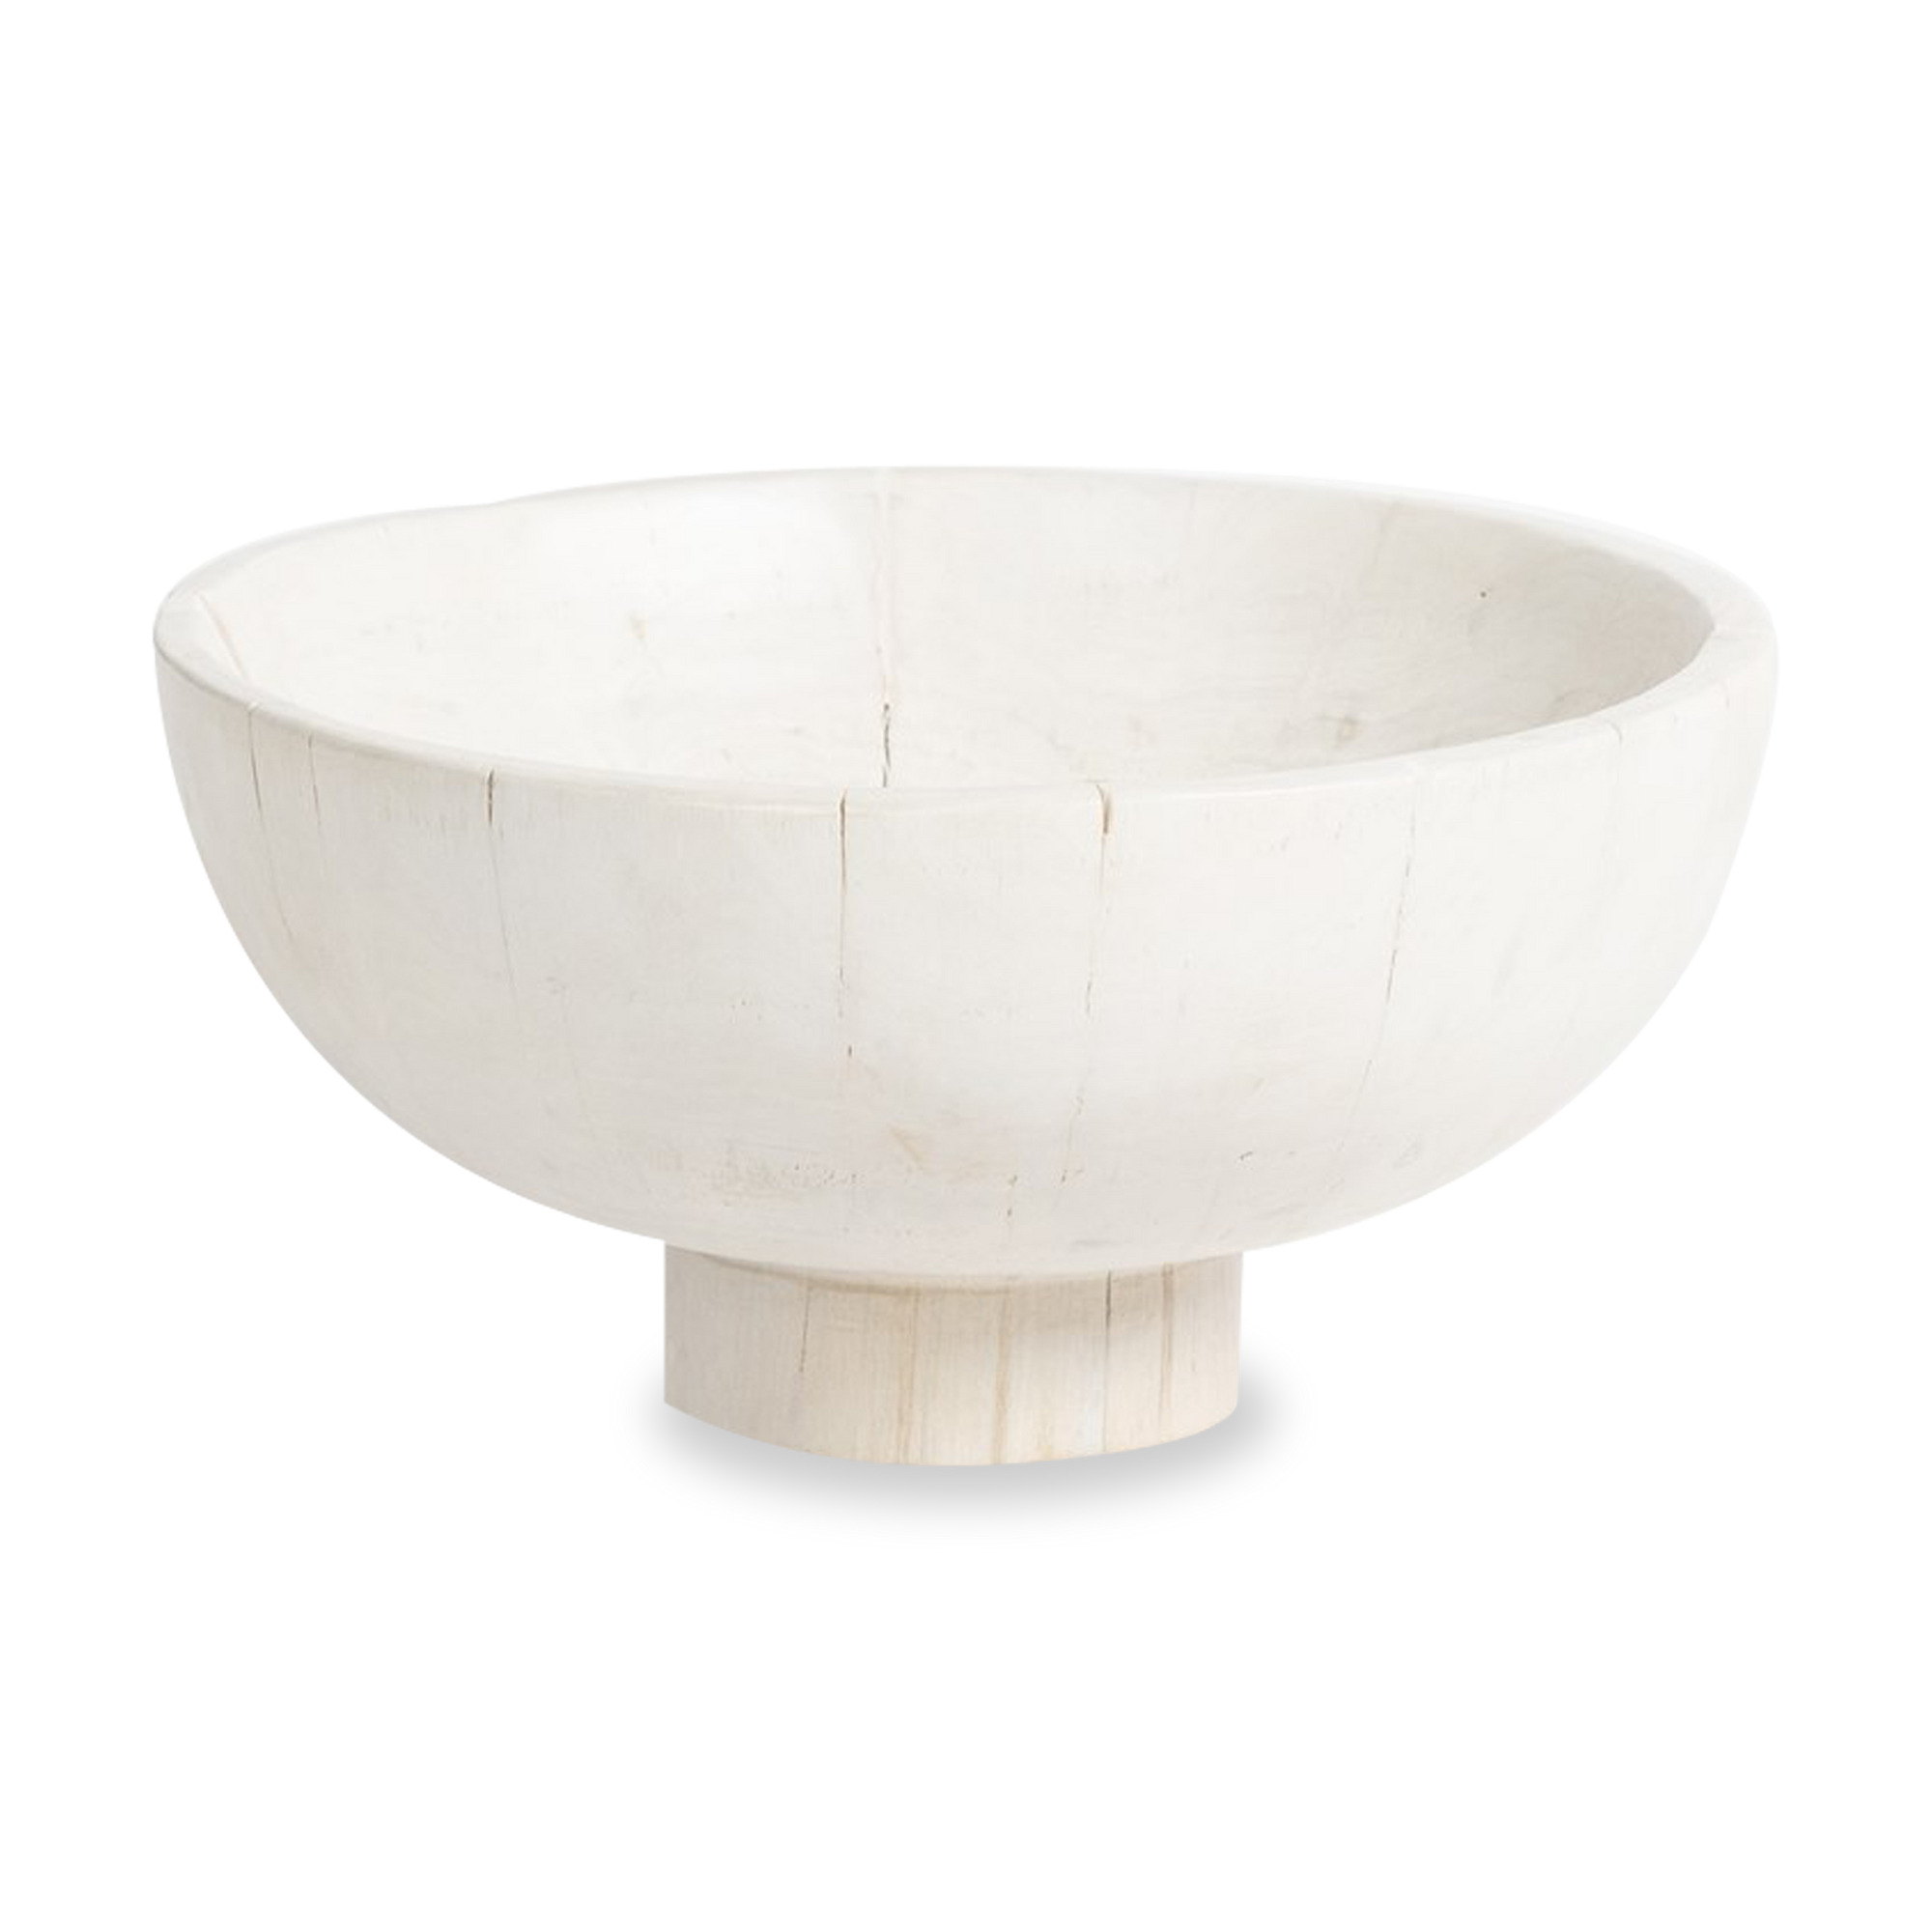 Made from mixed reclaimed woods and finished in an ivory white, the Turned Pedestal Bowl will bring an element of nature into your space.